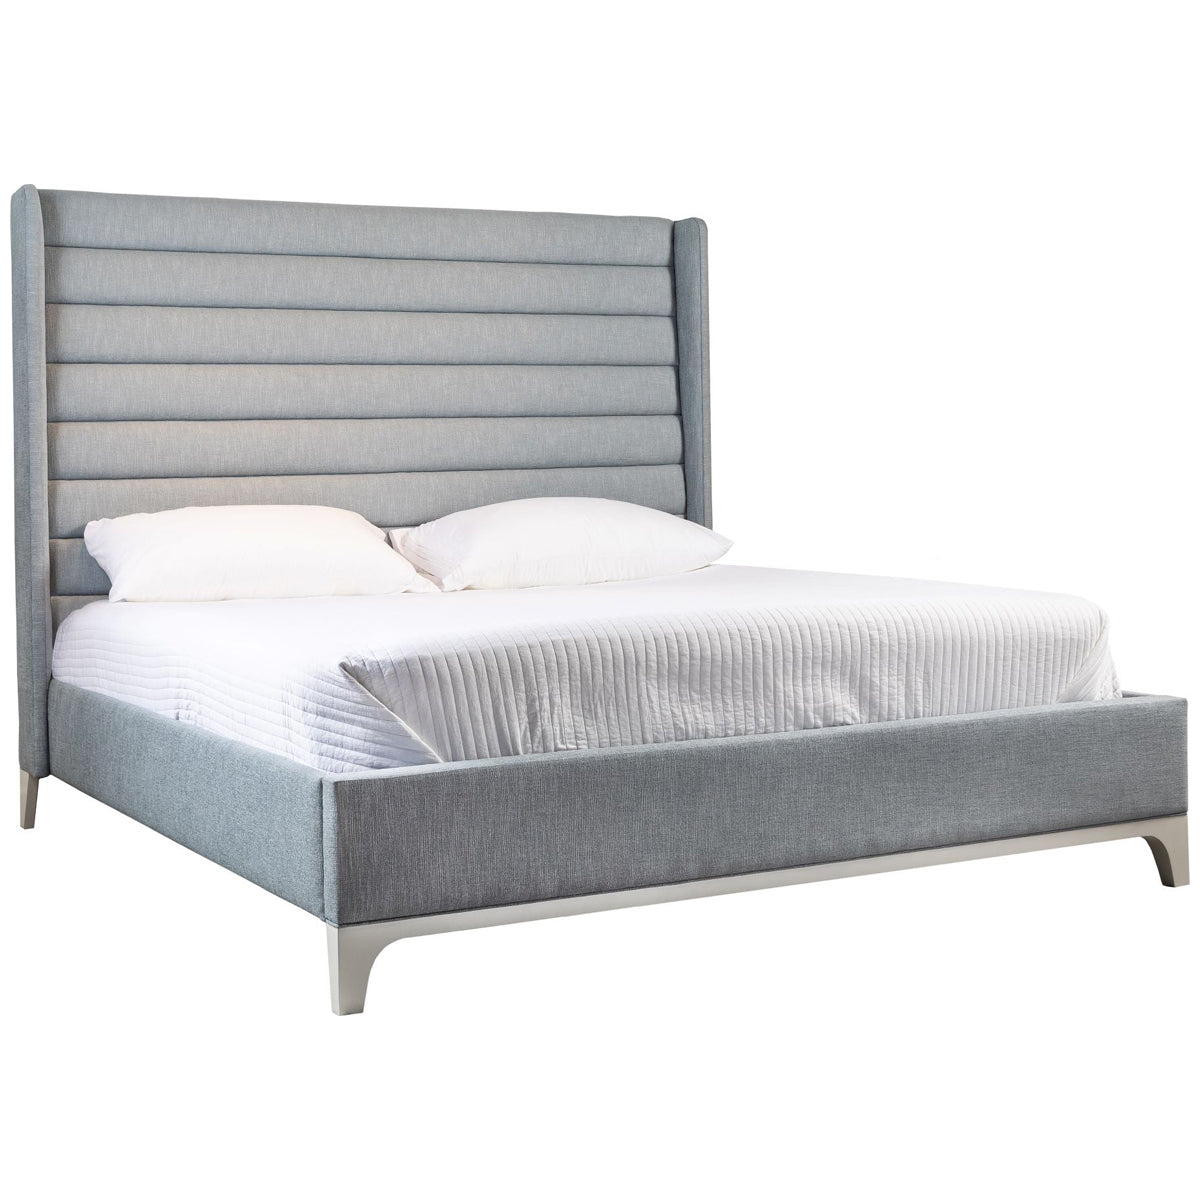 Belle Meade Signature Lyric Bed with Low Footboard